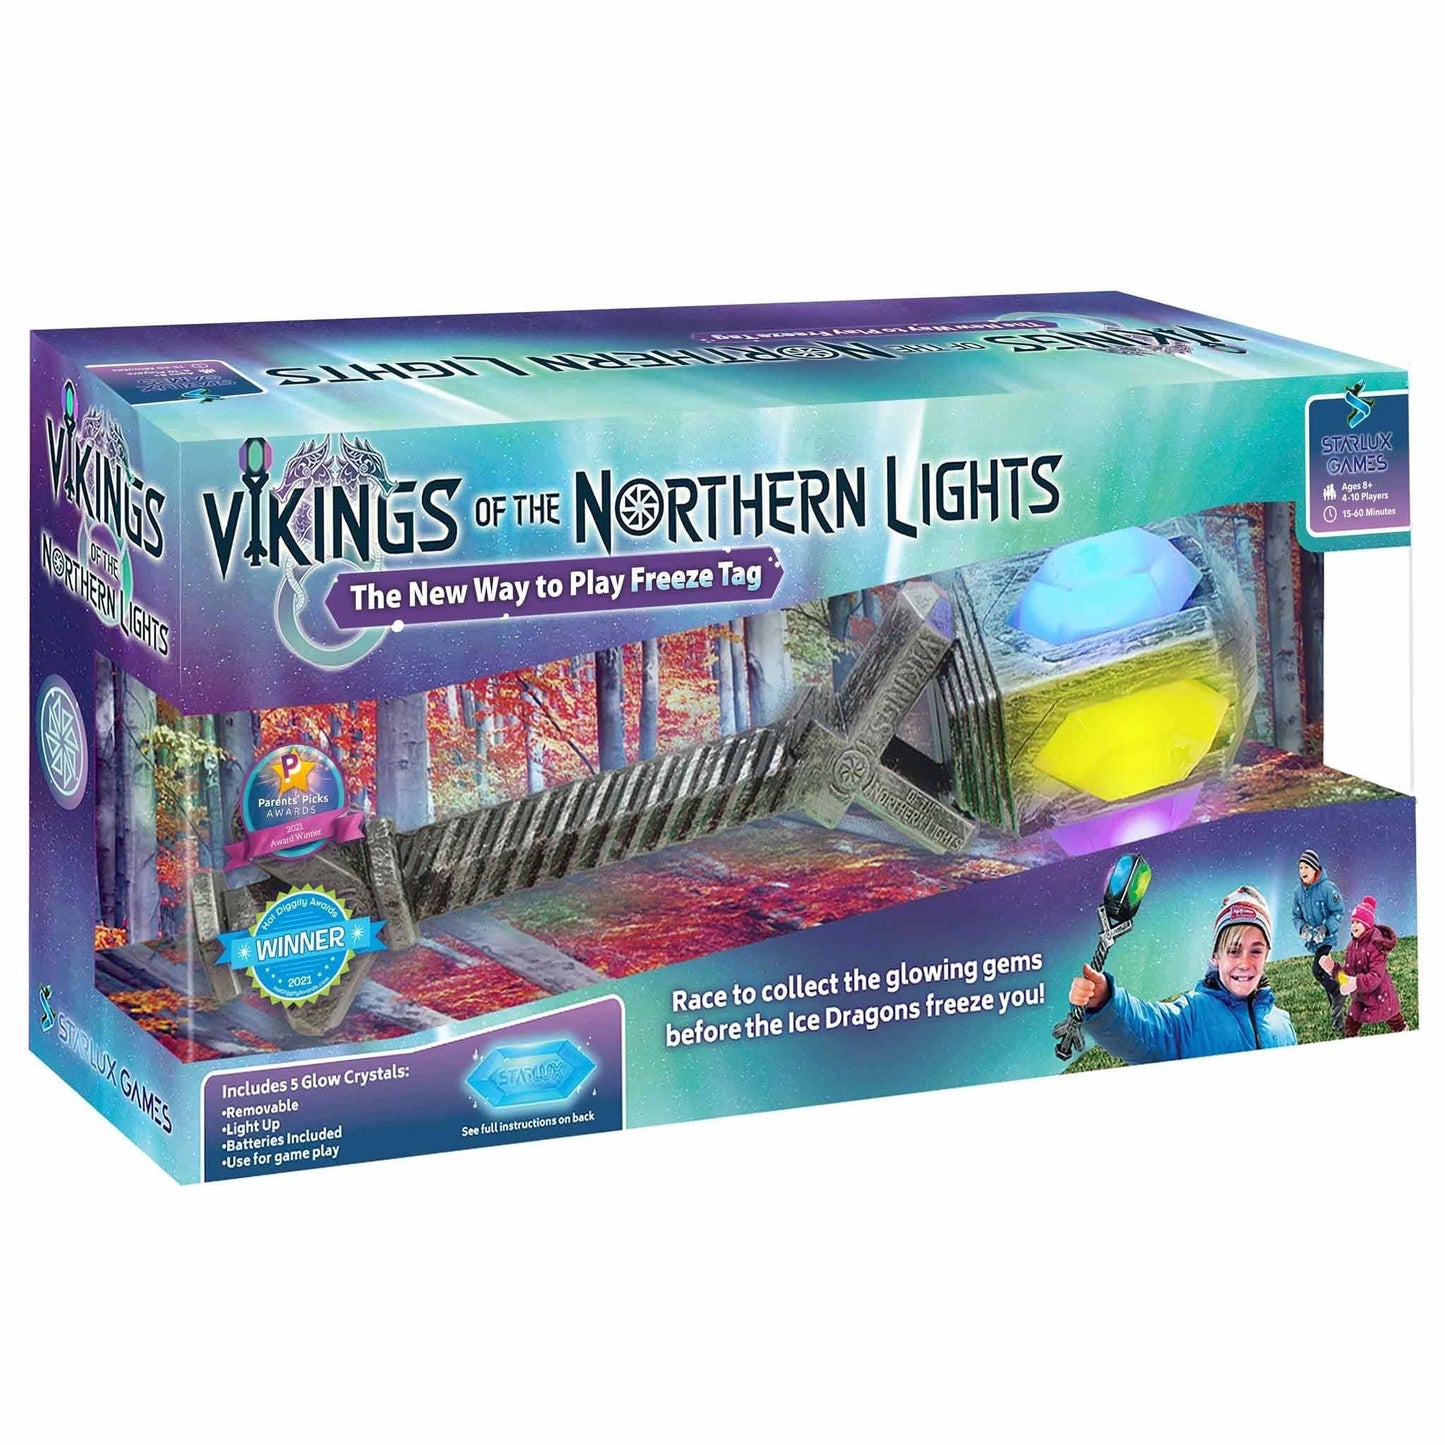 Vikings of the Northern Lights